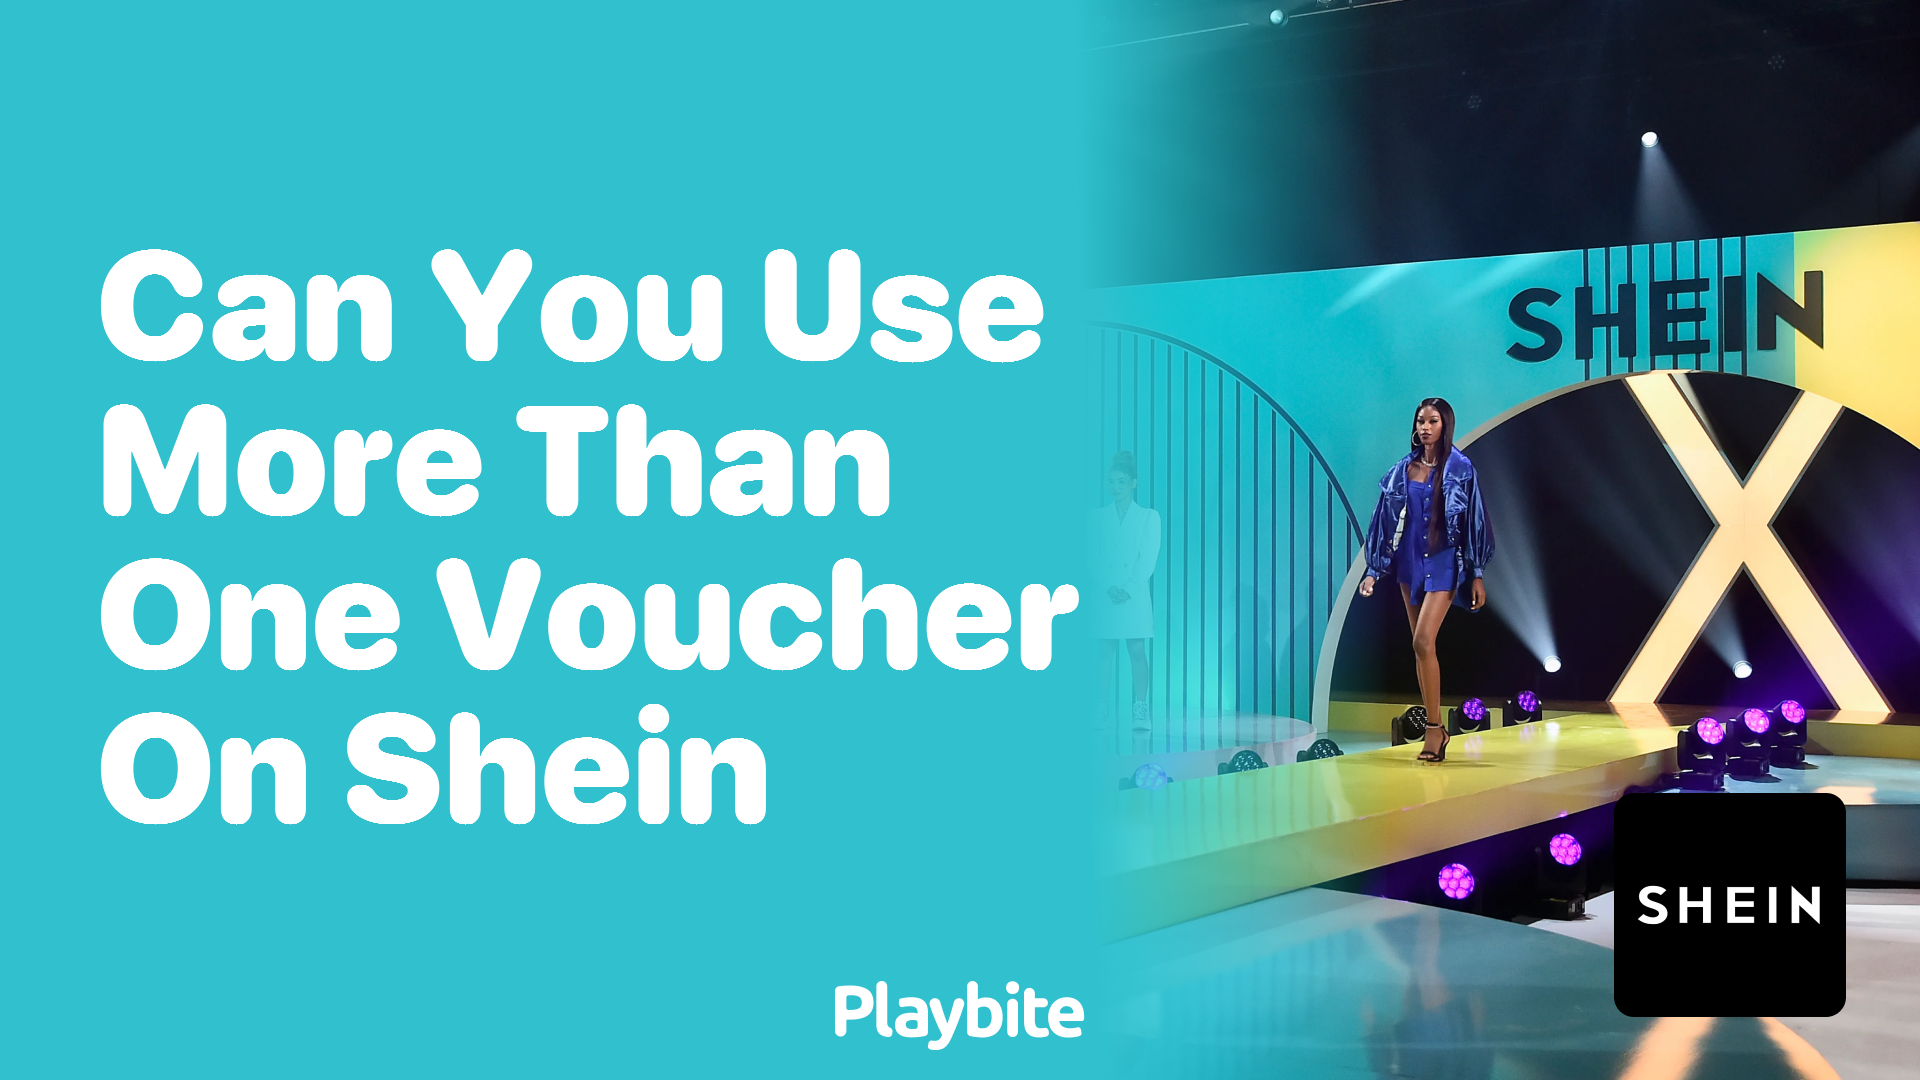 Can You Use More Than One Voucher on SHEIN?